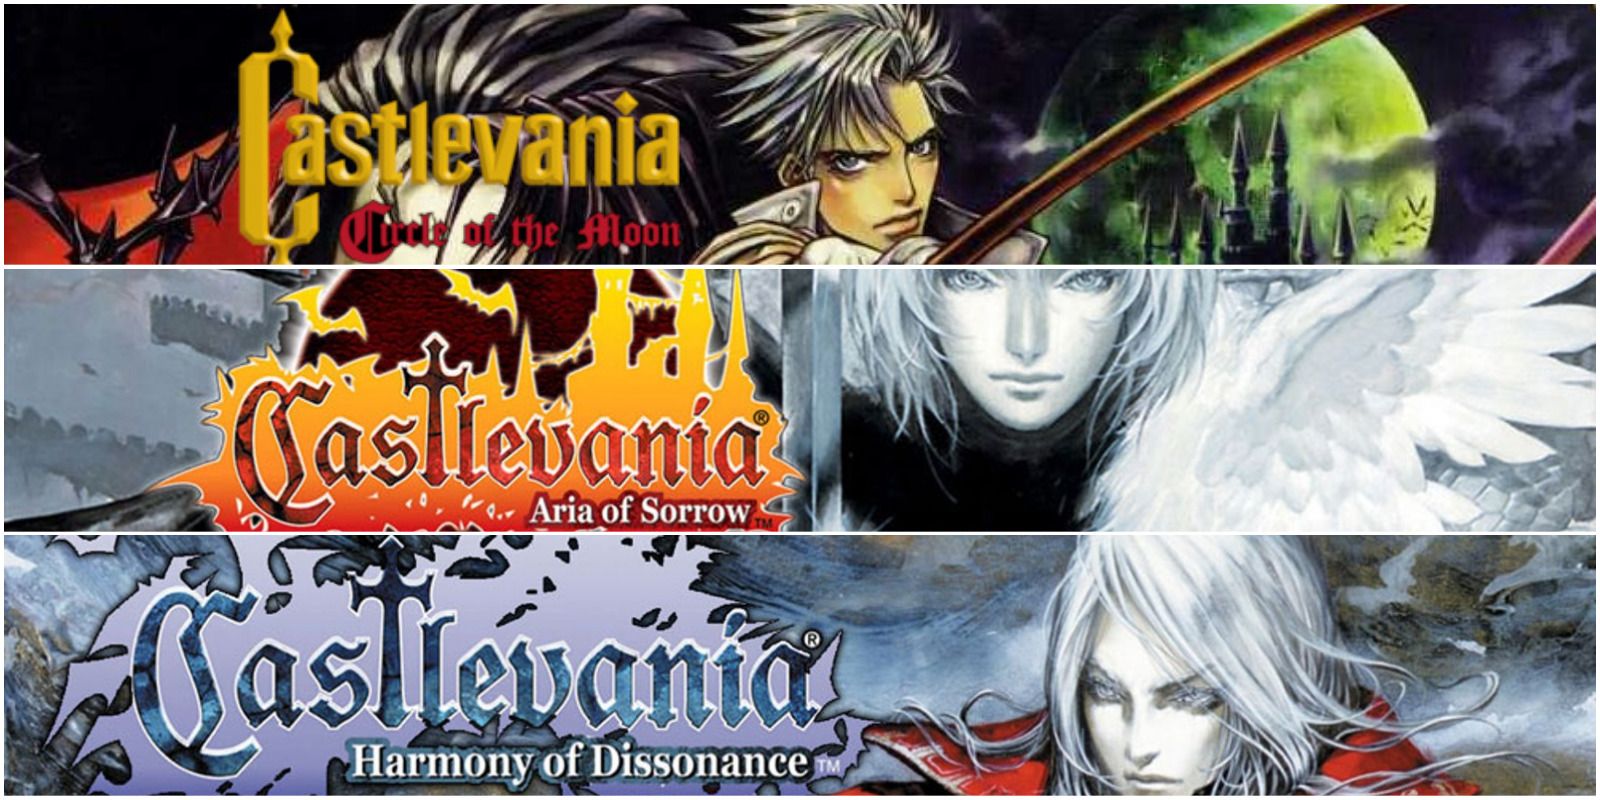 Castlevania Gameboy Advance Titles, Aria of Sorrow, Circle of the Moon, Harmony of Dissonance